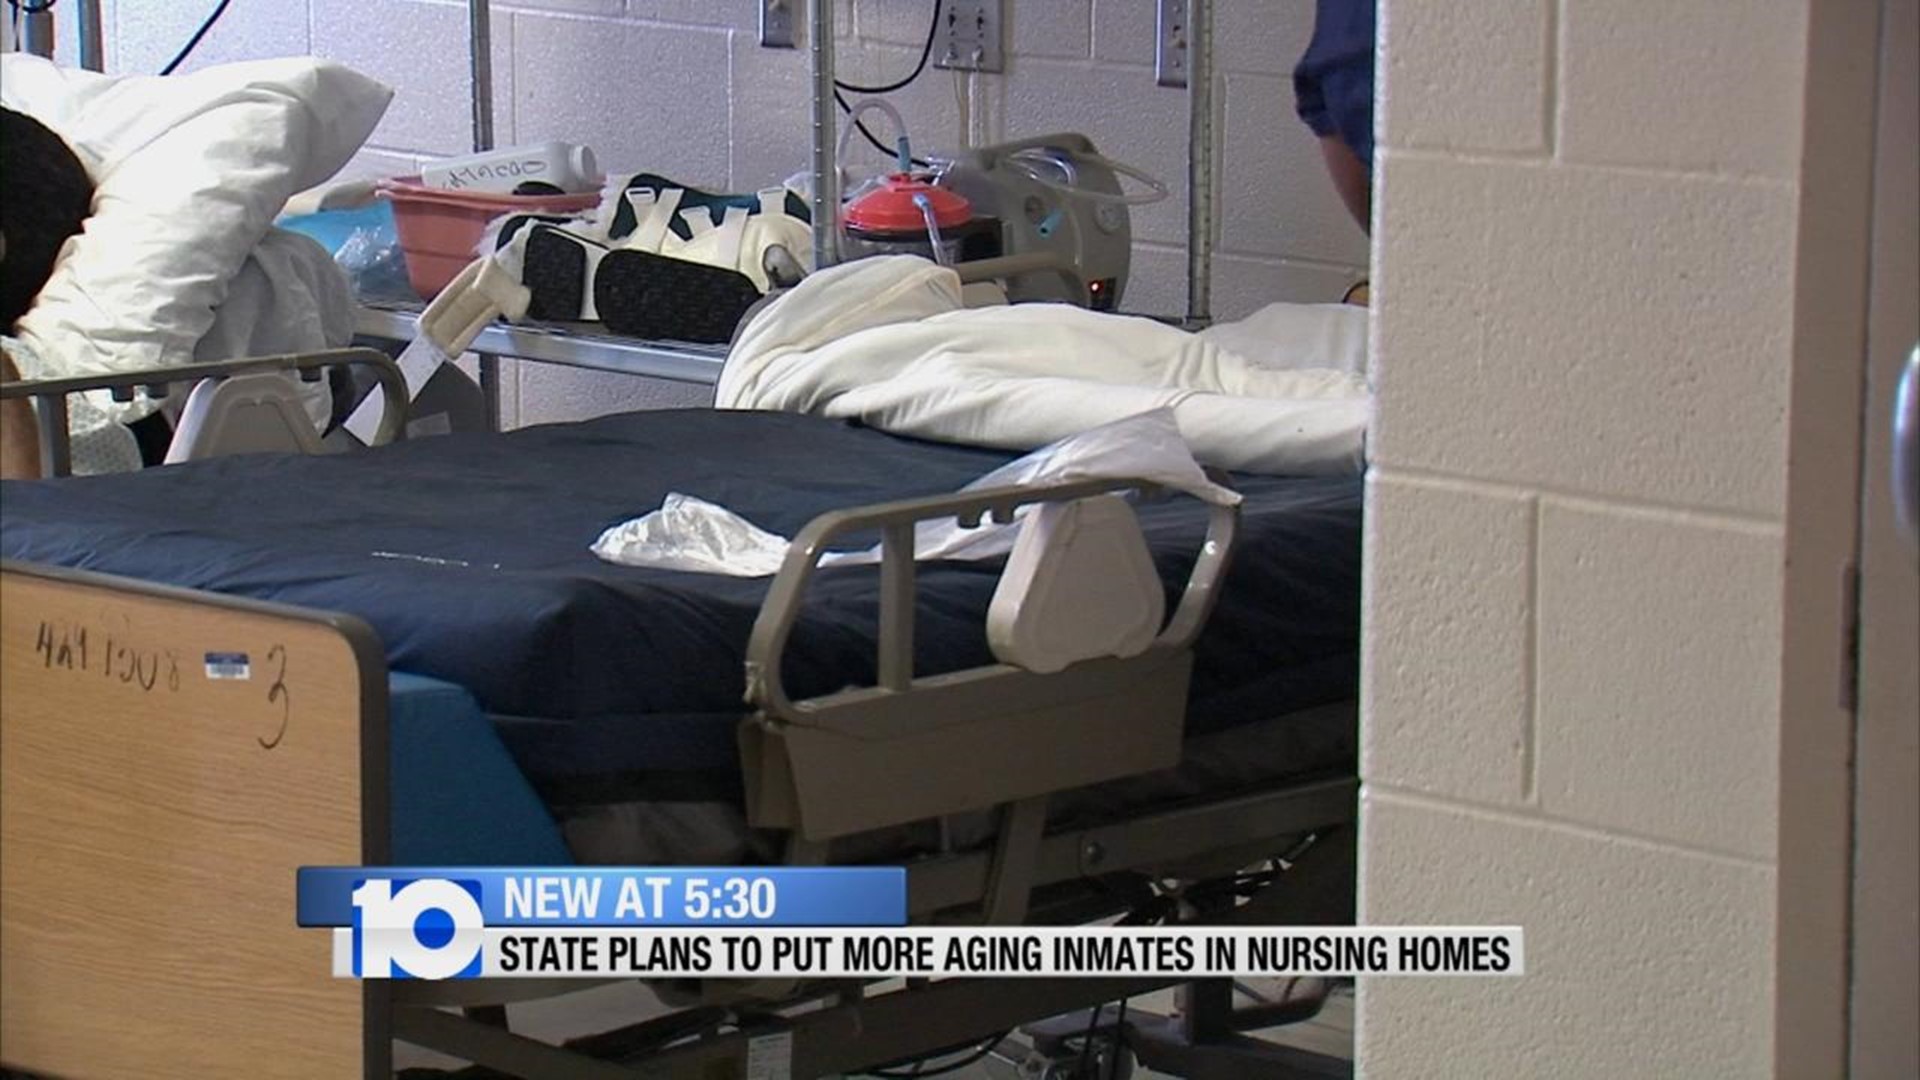 State Plans To Put More Aging Inmates In Nursing Homes